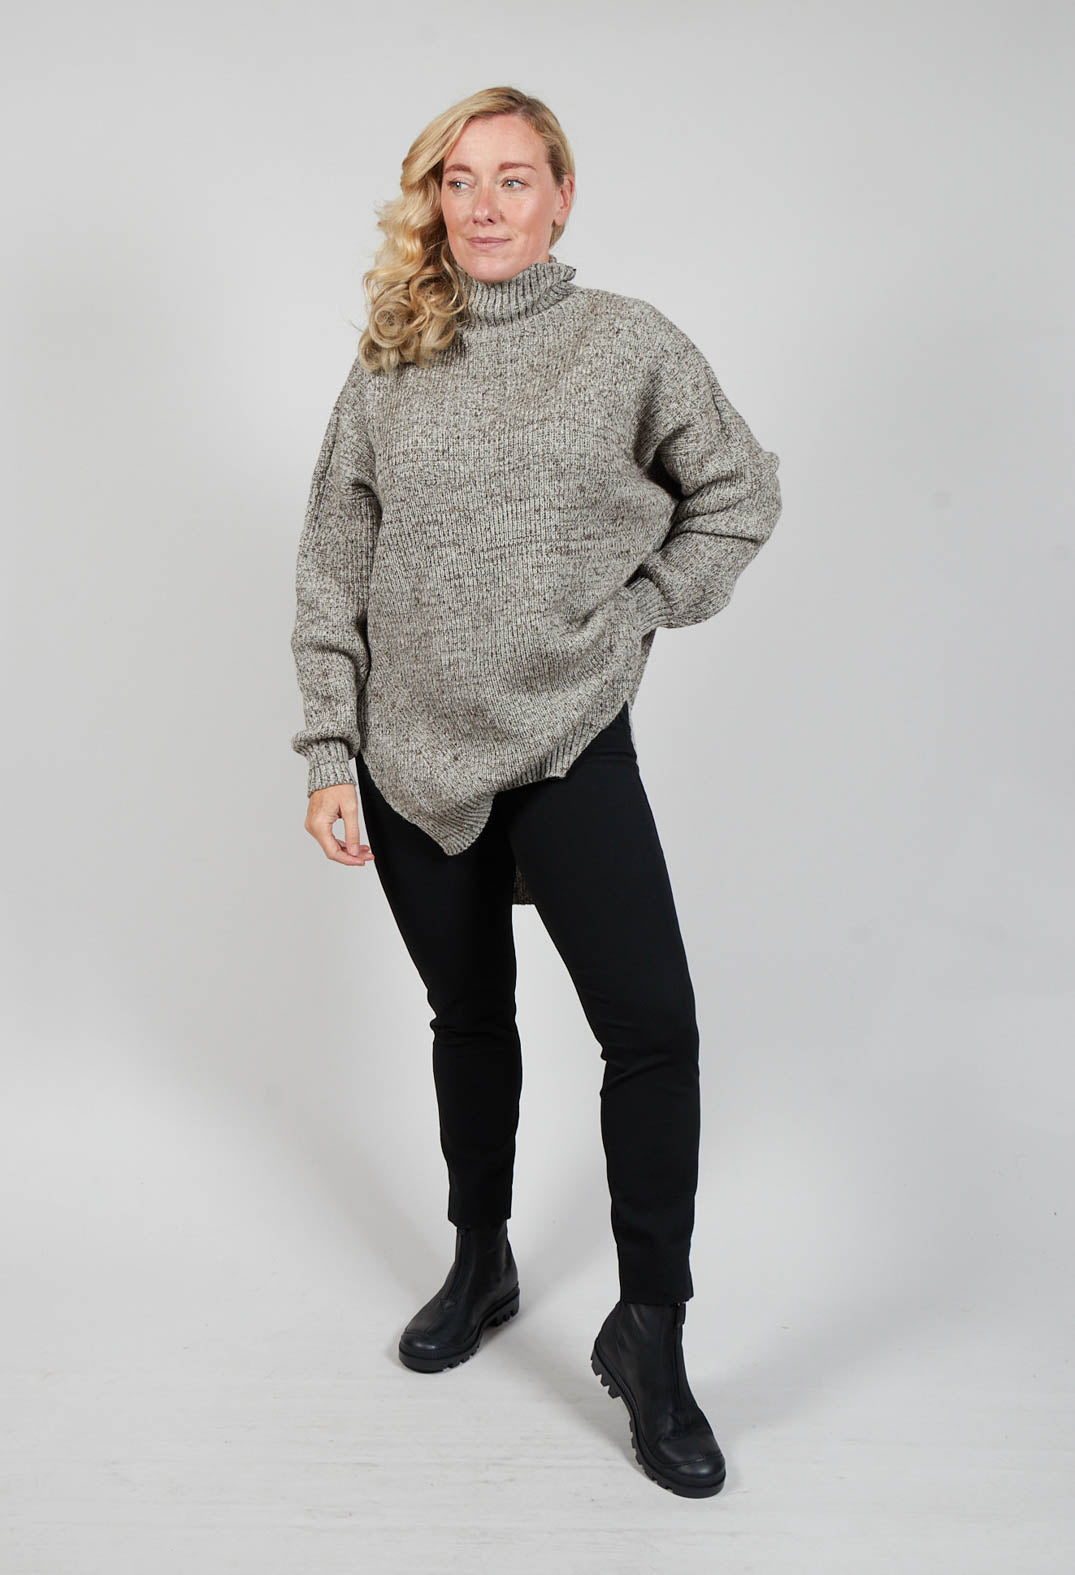 Formio Tricot Knitted Jumper in Multicolour